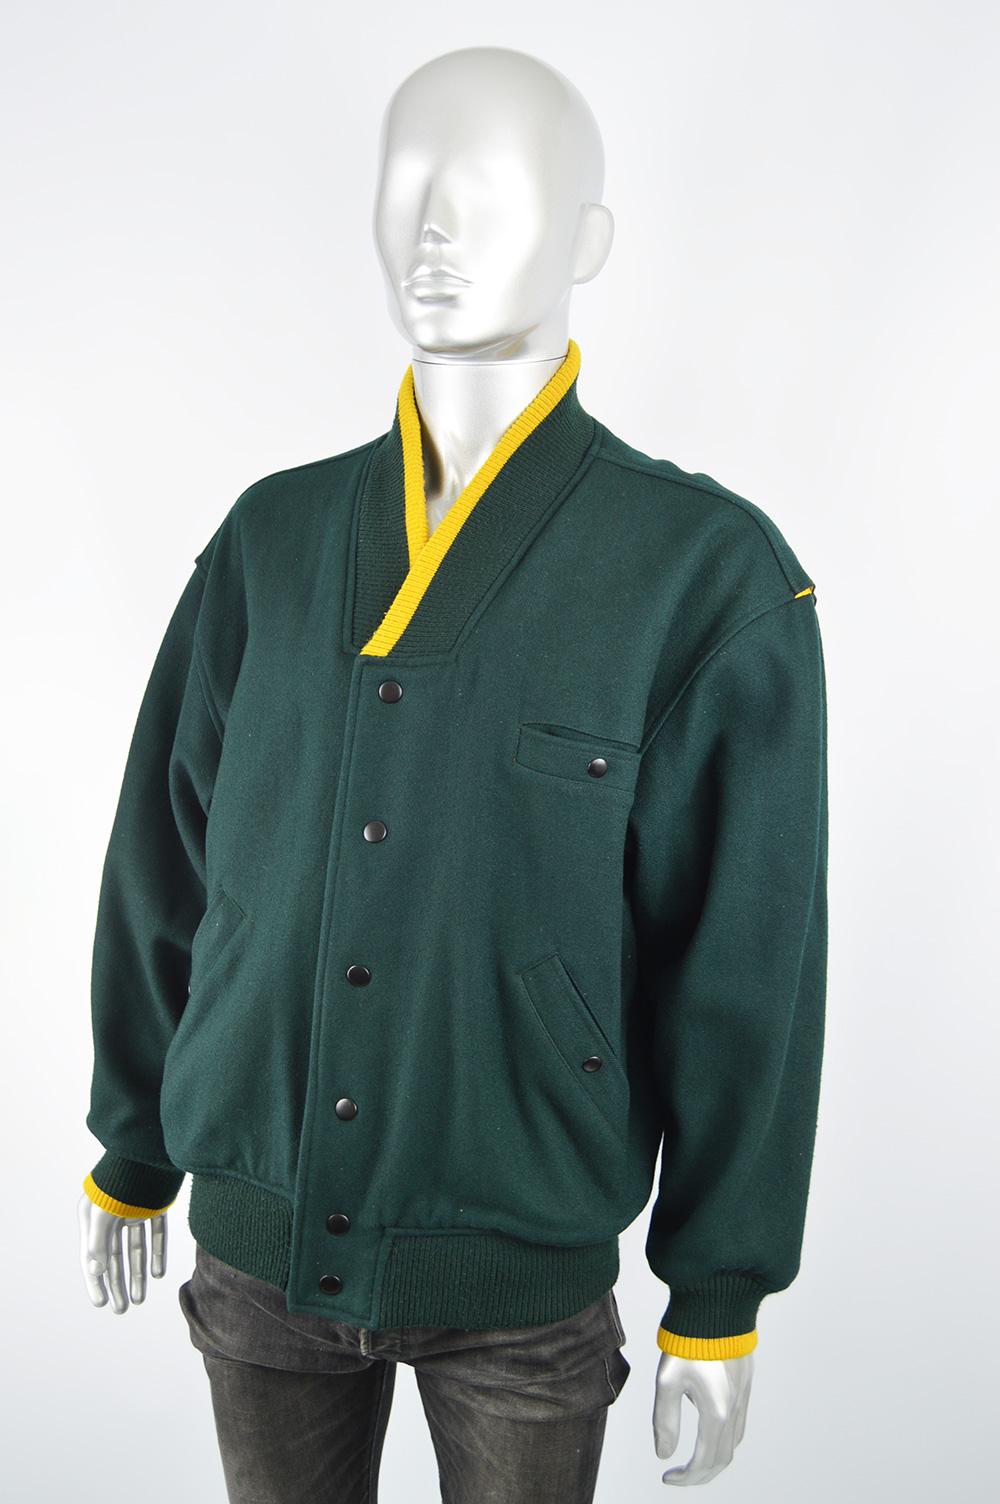 green and yellow letterman jacket